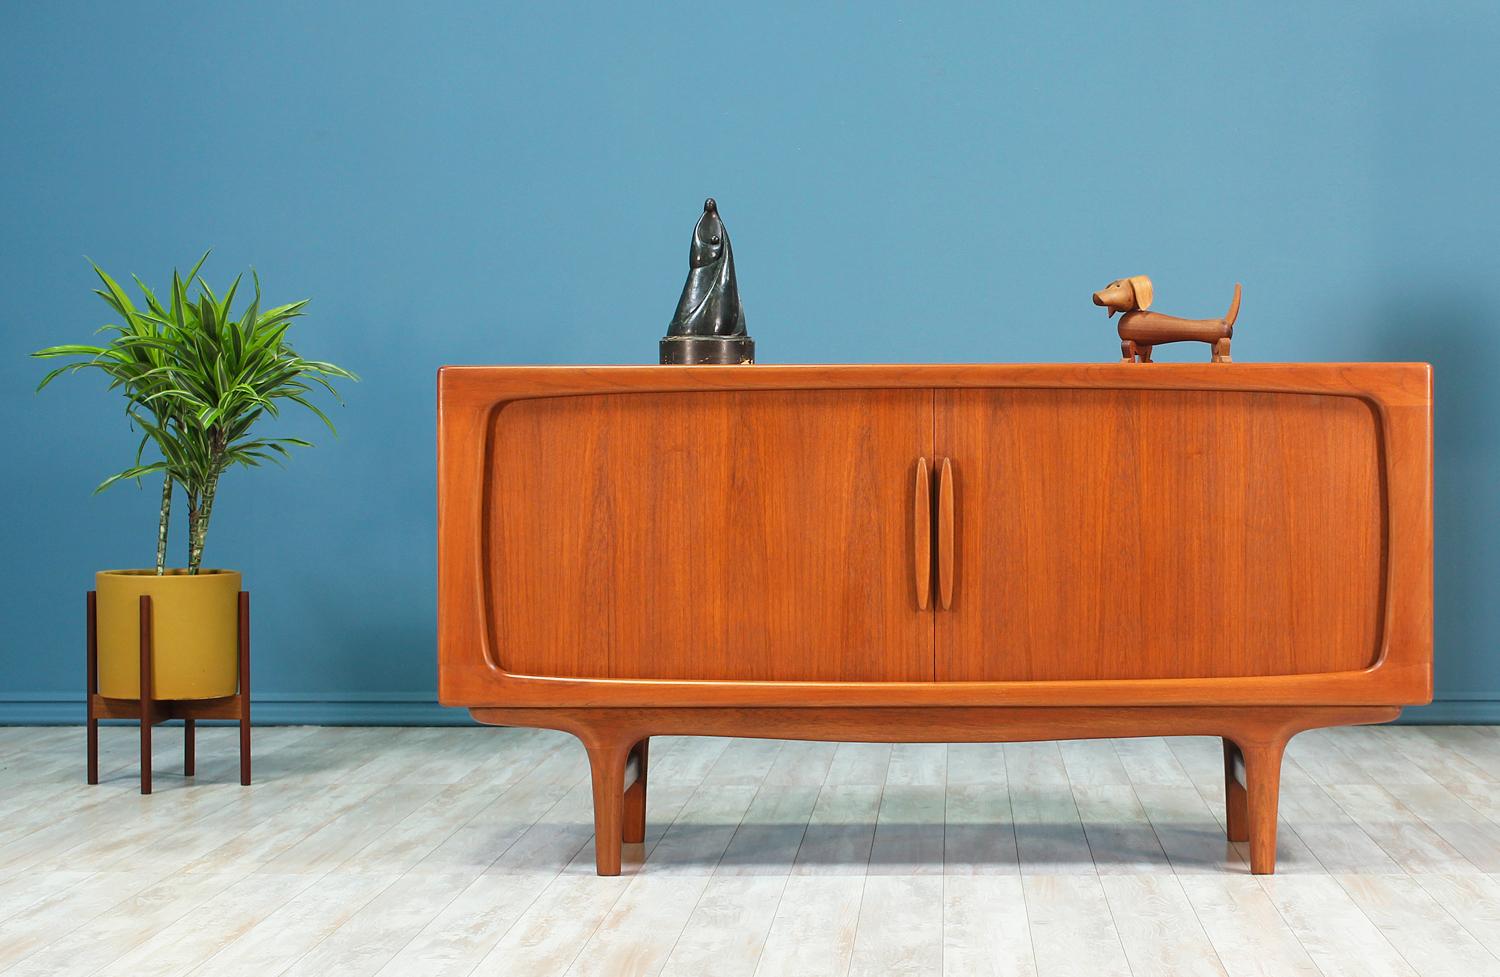 Elegant tambour door credenza designed and manufactured by Falster Møbelfabrik in Denmark circa 1950’s. This credenza features a spectacular teak wood frame with soft beveled inner edges and a solid teak wood base with subtly tapered legs supported